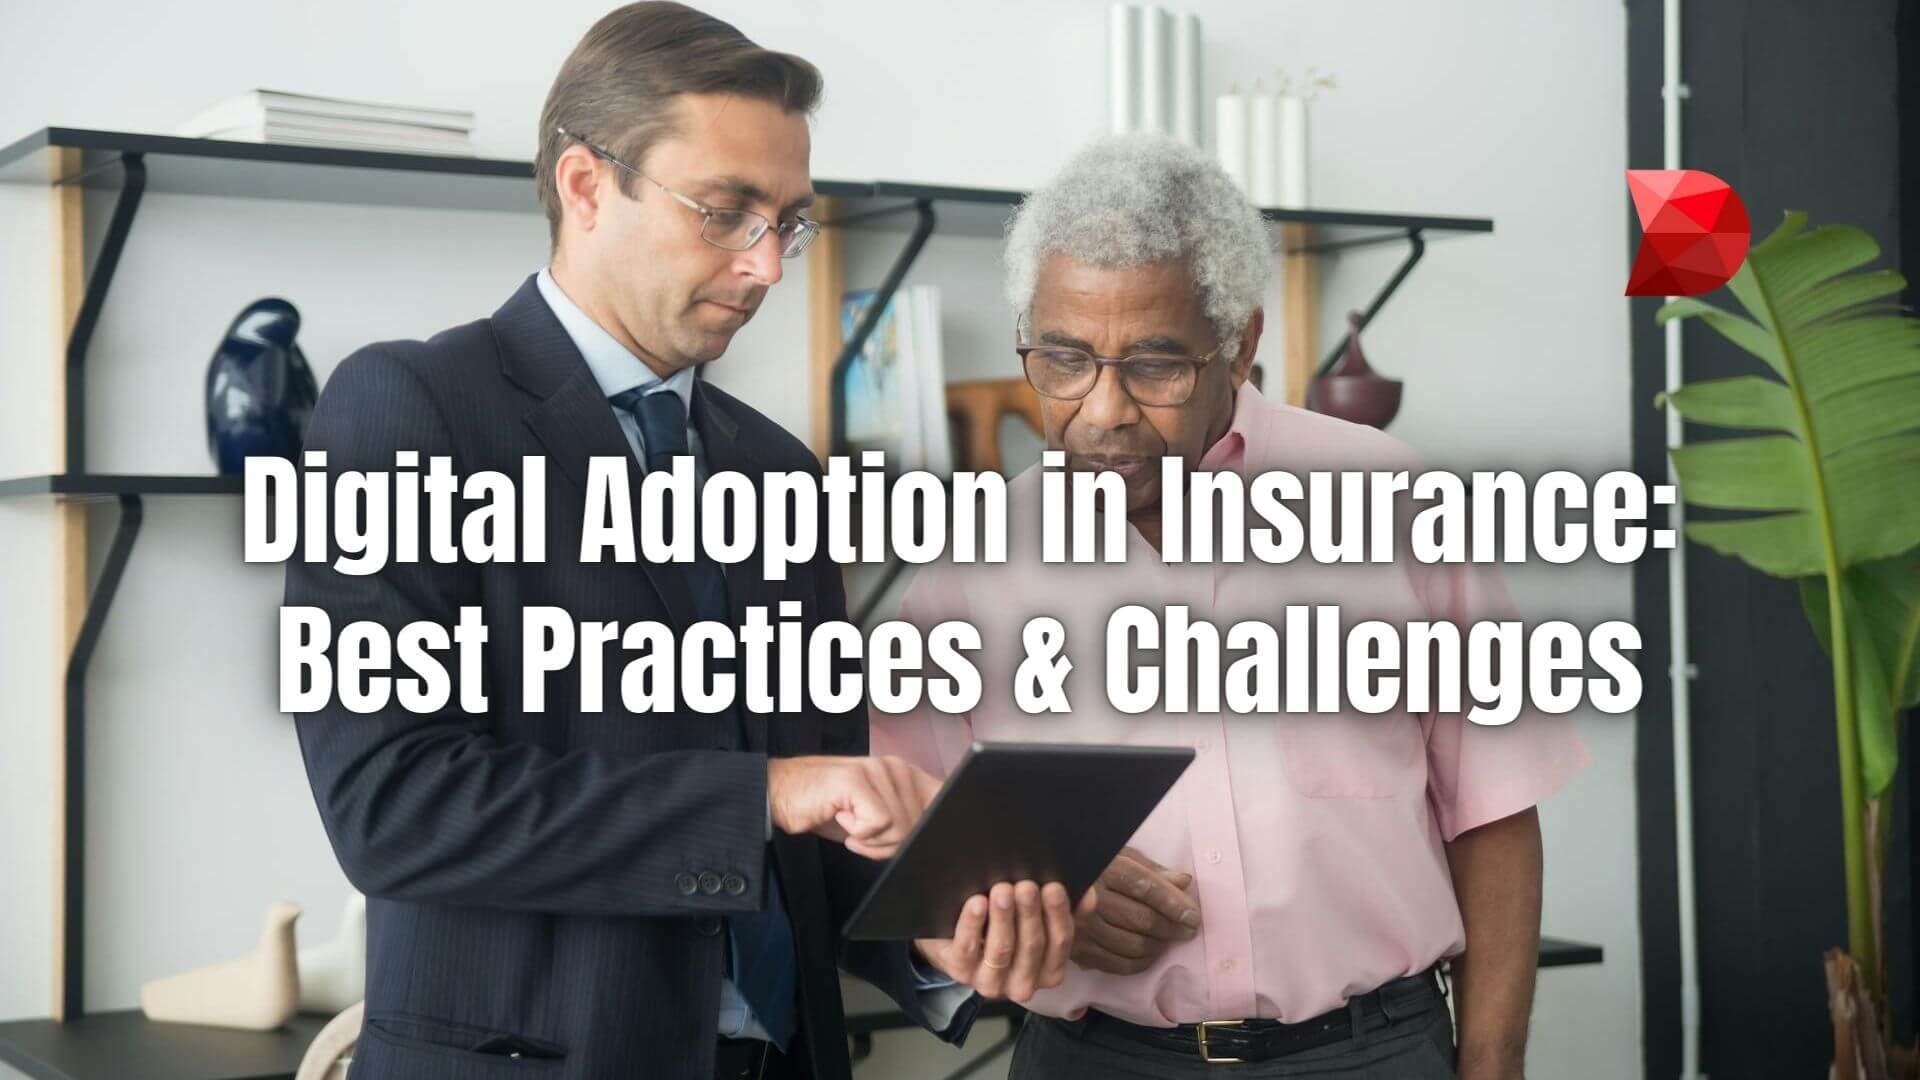 Dive deep into the world of digital adoption in insurance. Click here to discover best practices and overcome challenges with our full guide.